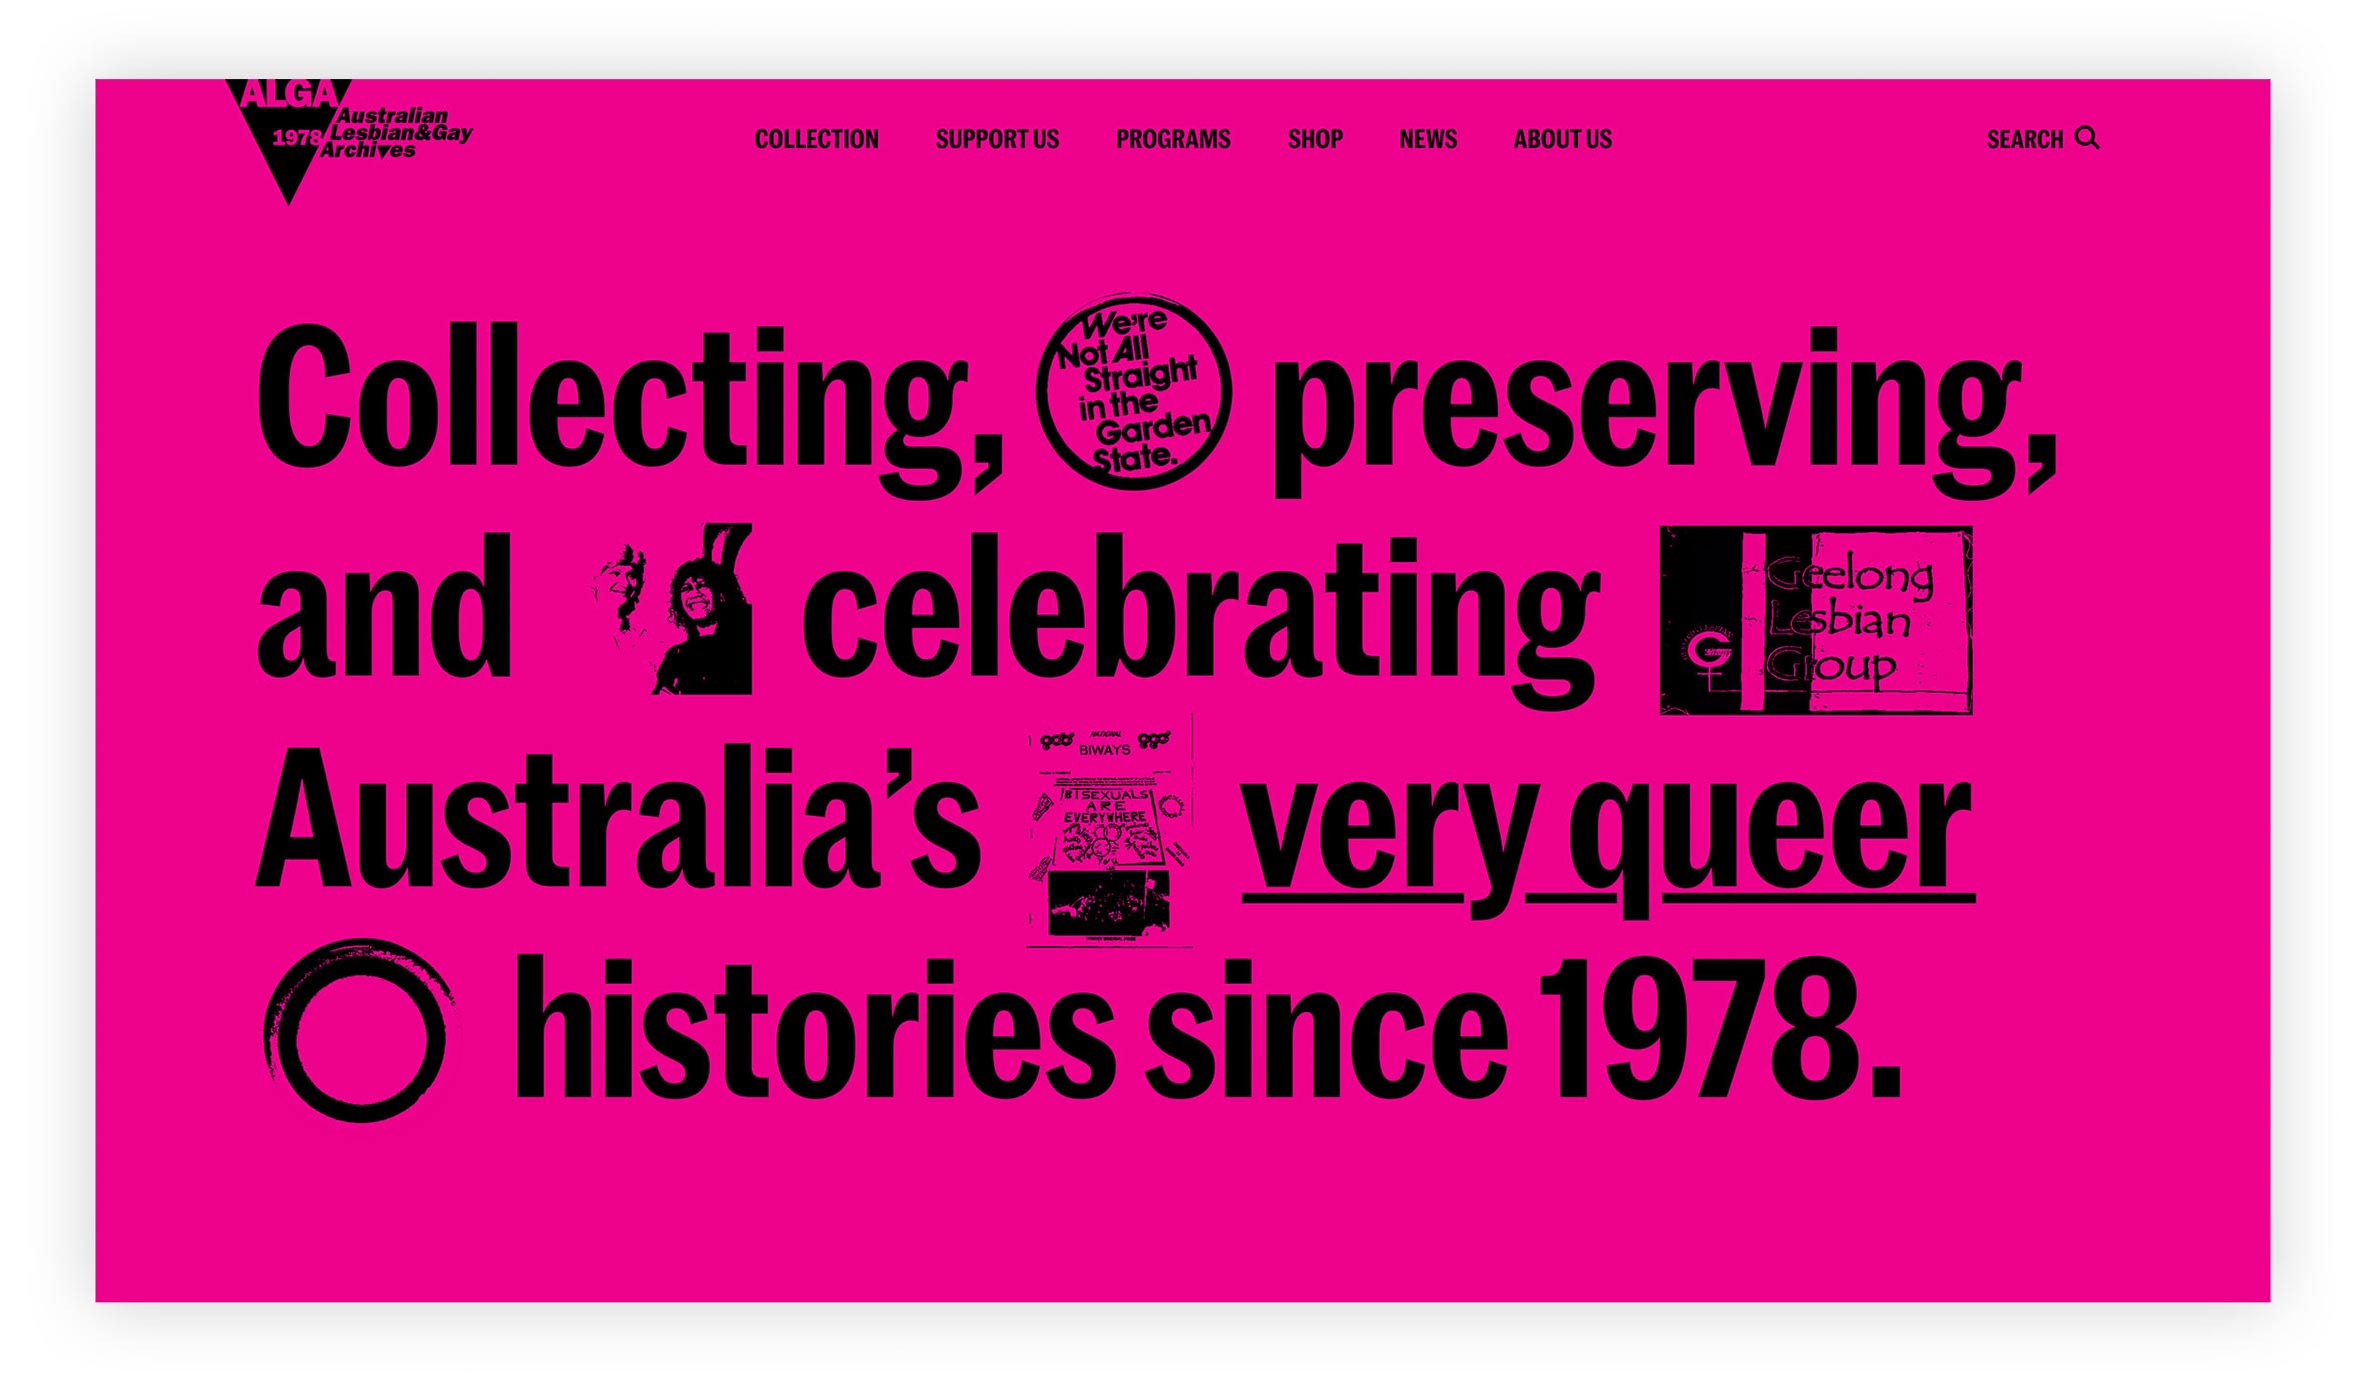 The Australian Queer Archives